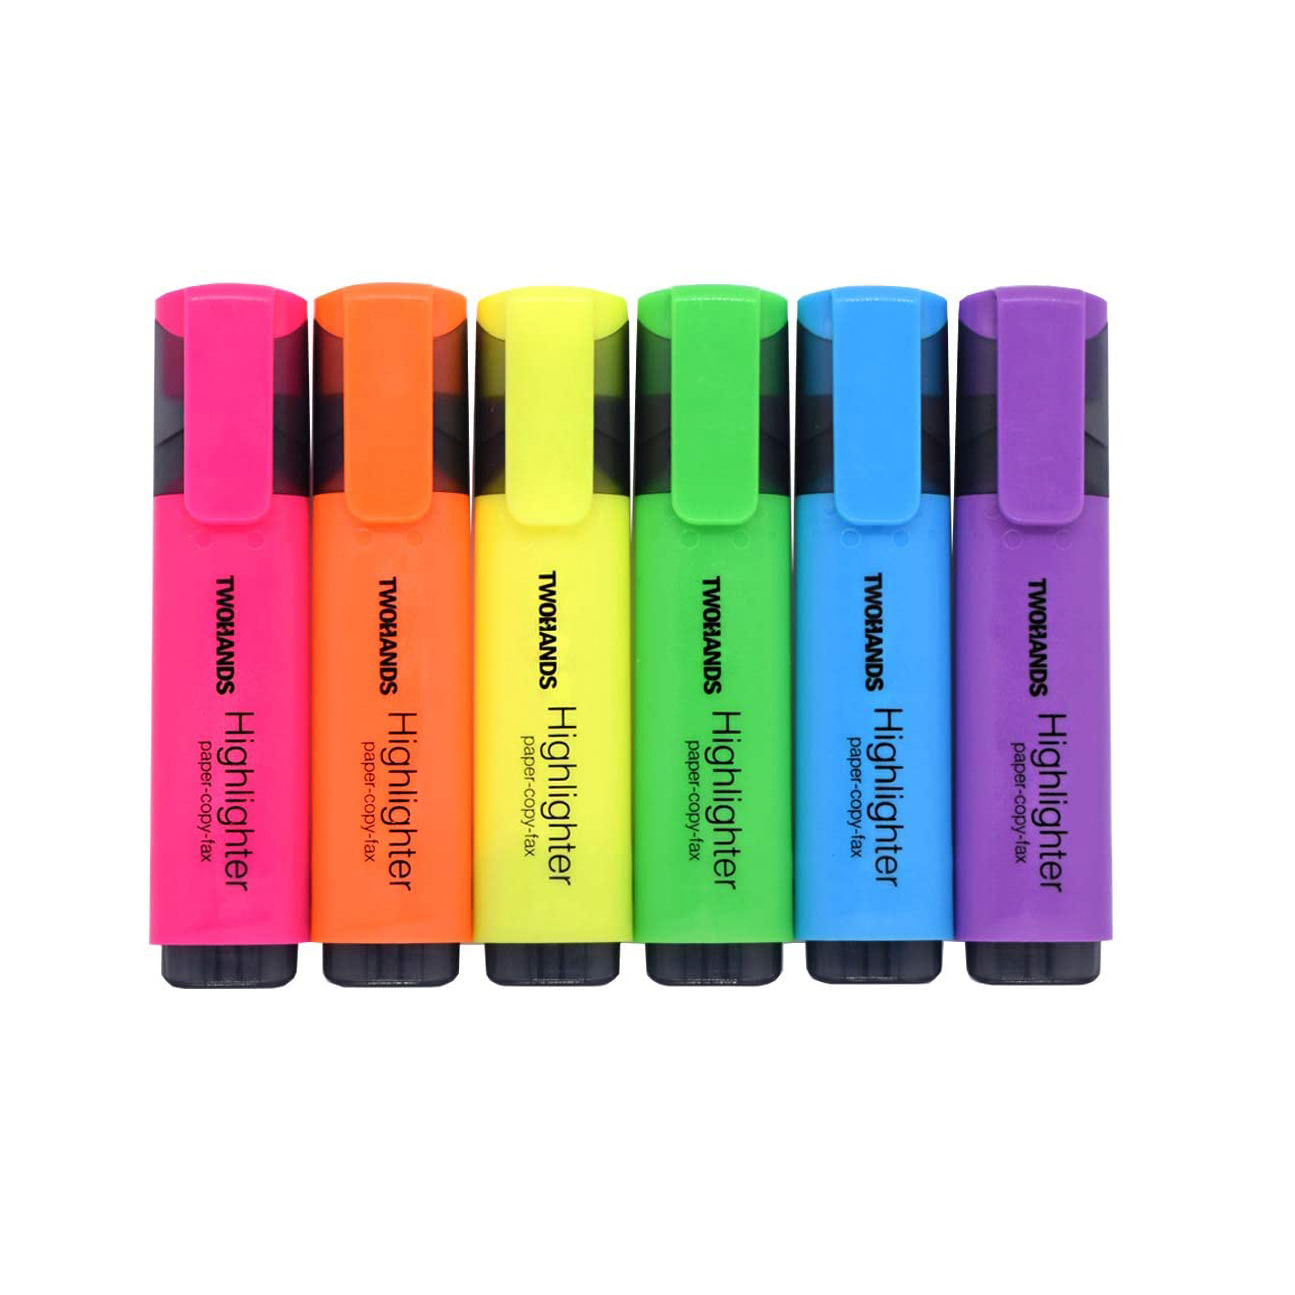 TWOHANDS Highlighter, 6 Classic Colors,20062 Featured Image